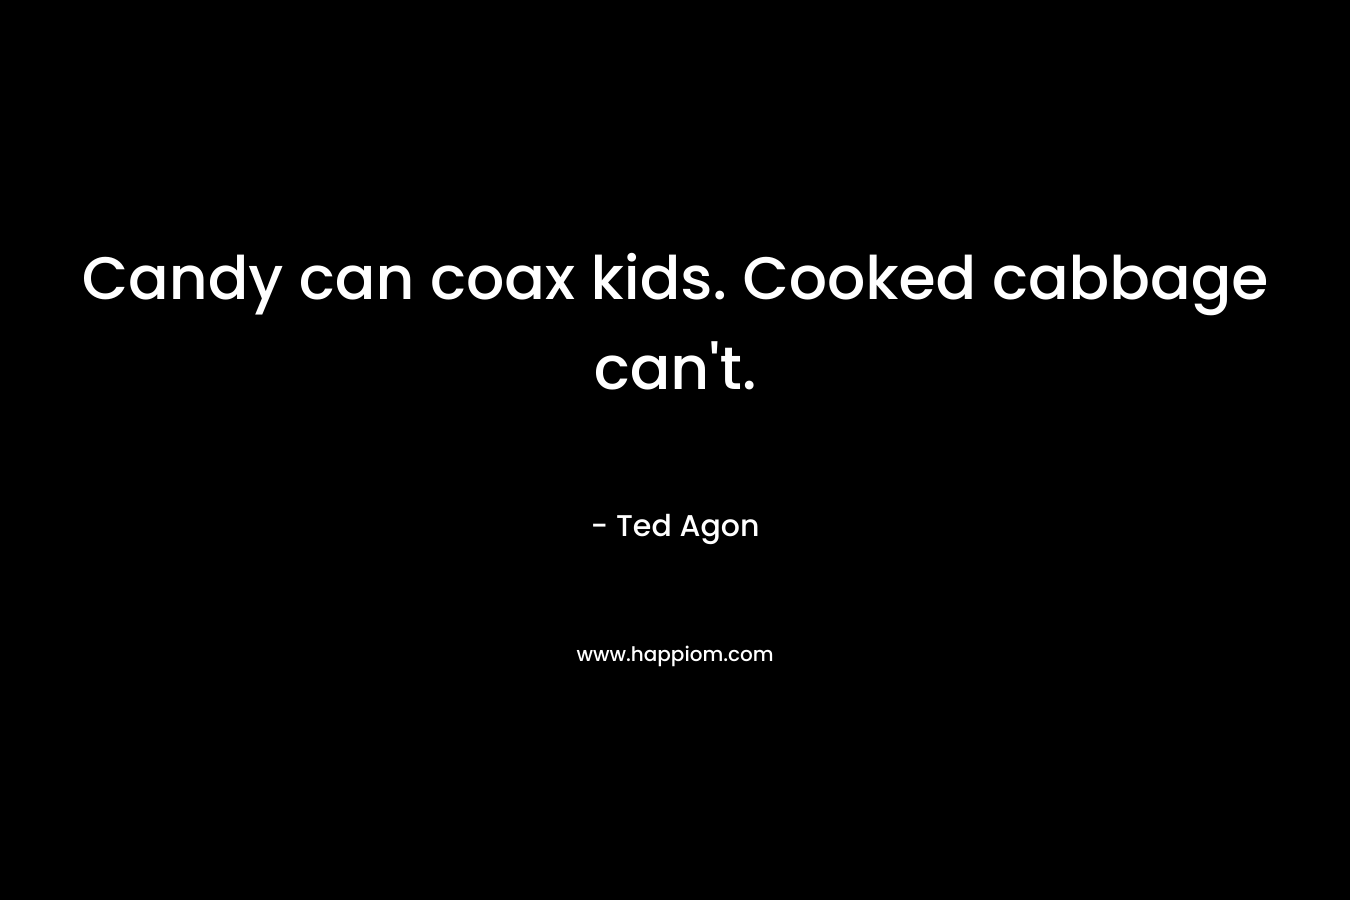 Candy can coax kids. Cooked cabbage can't.